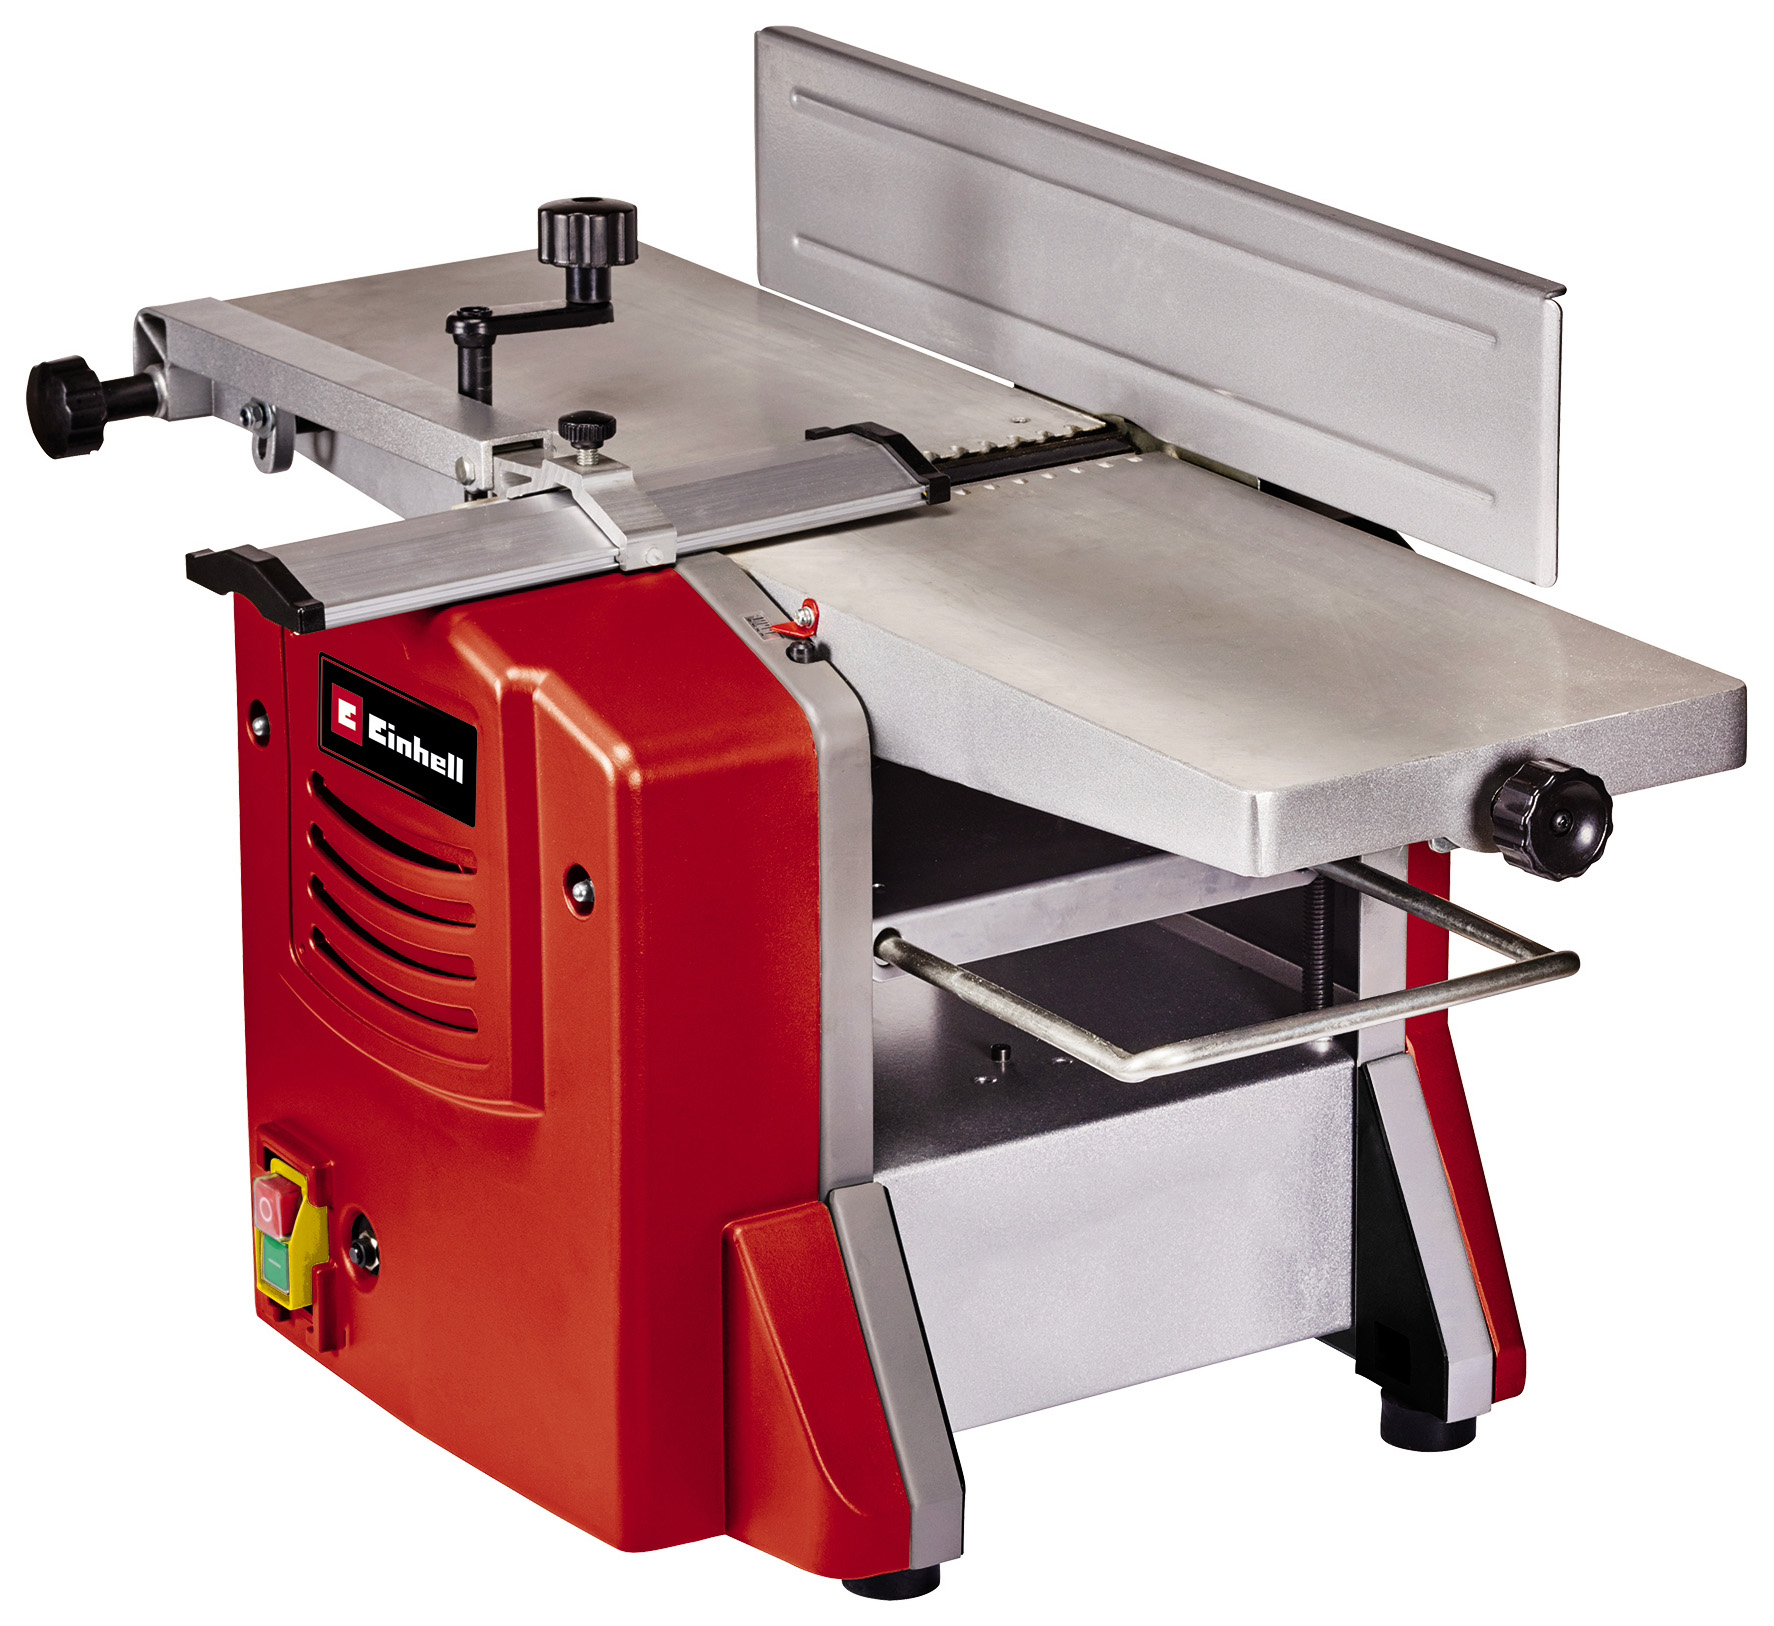 Einhell TC-SP 204 204mm Corded Planer Thicknesser - 1500W